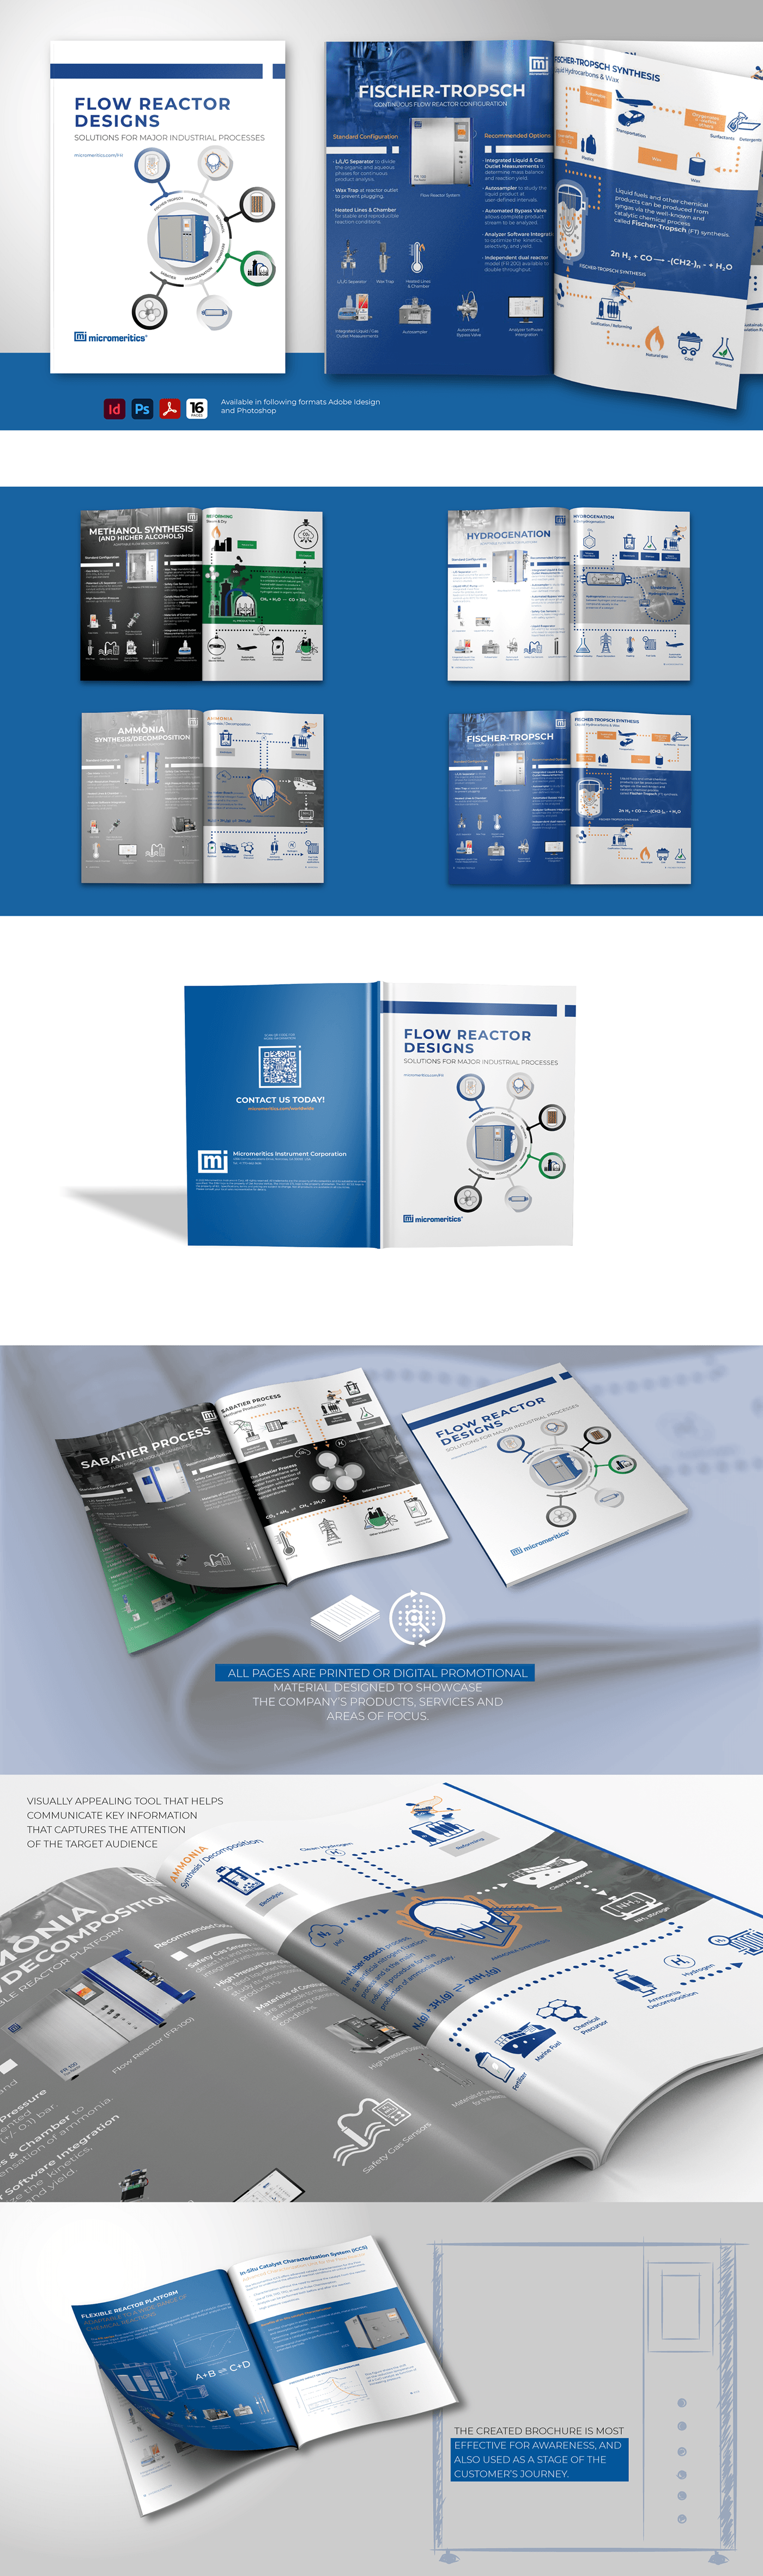 corporate marketing   visual identity brochure Layout print editorial graphic design  publication Advertising and marketing